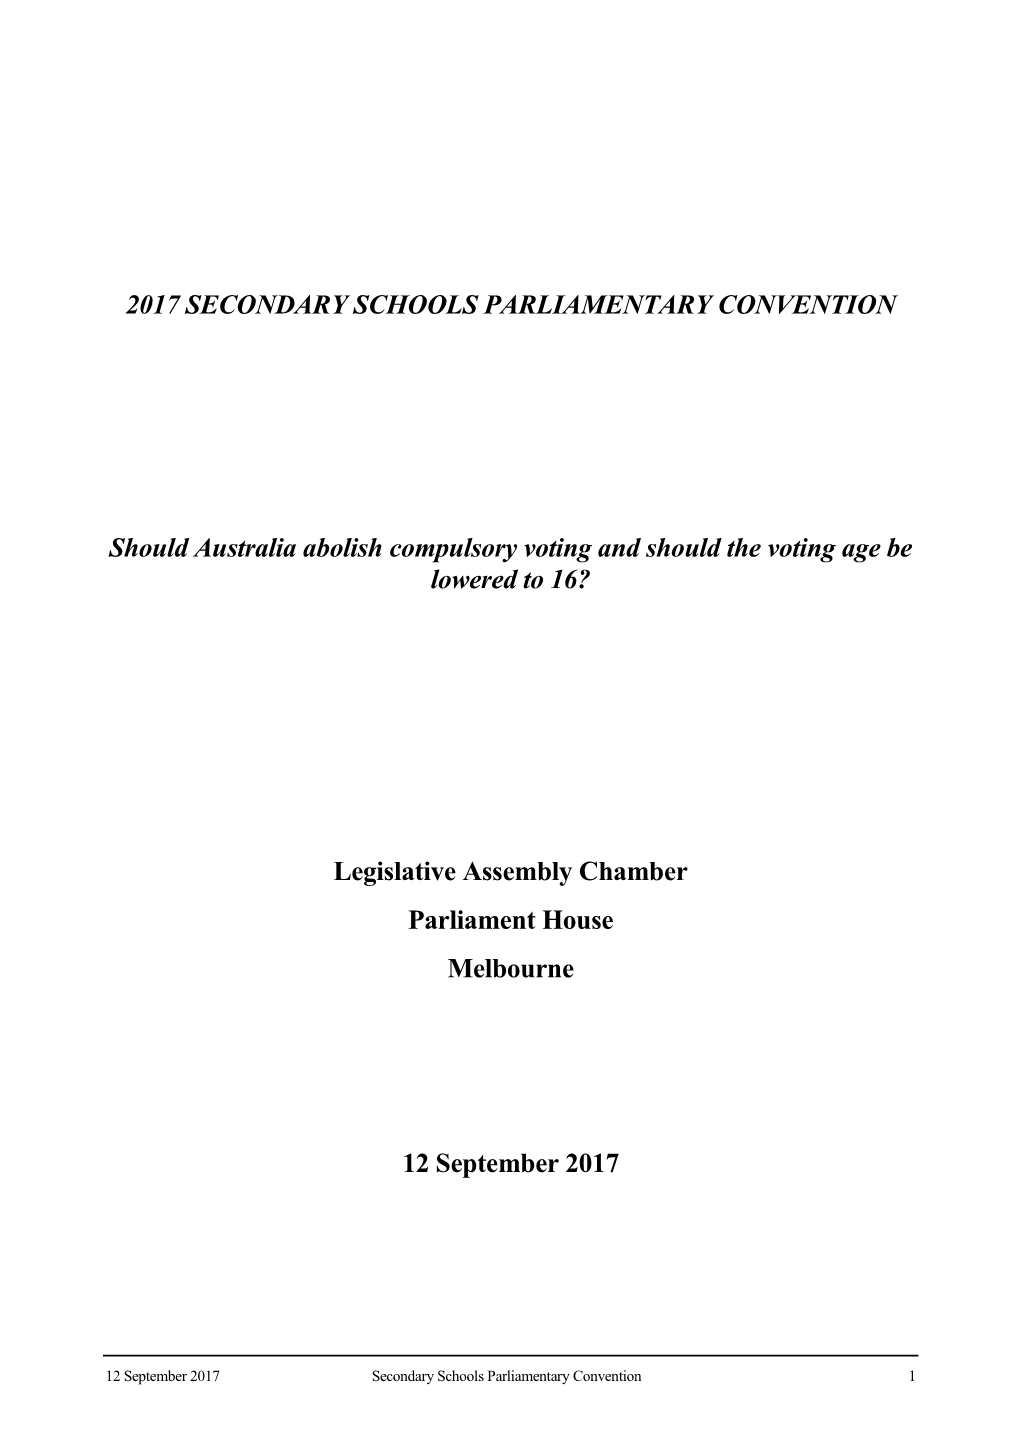 2017 SECONDARY SCHOOLS PARLIAMENTARY CONVENTION Should Australia Abolish Compulsory Voting and Should the Voting Age Be Lowered